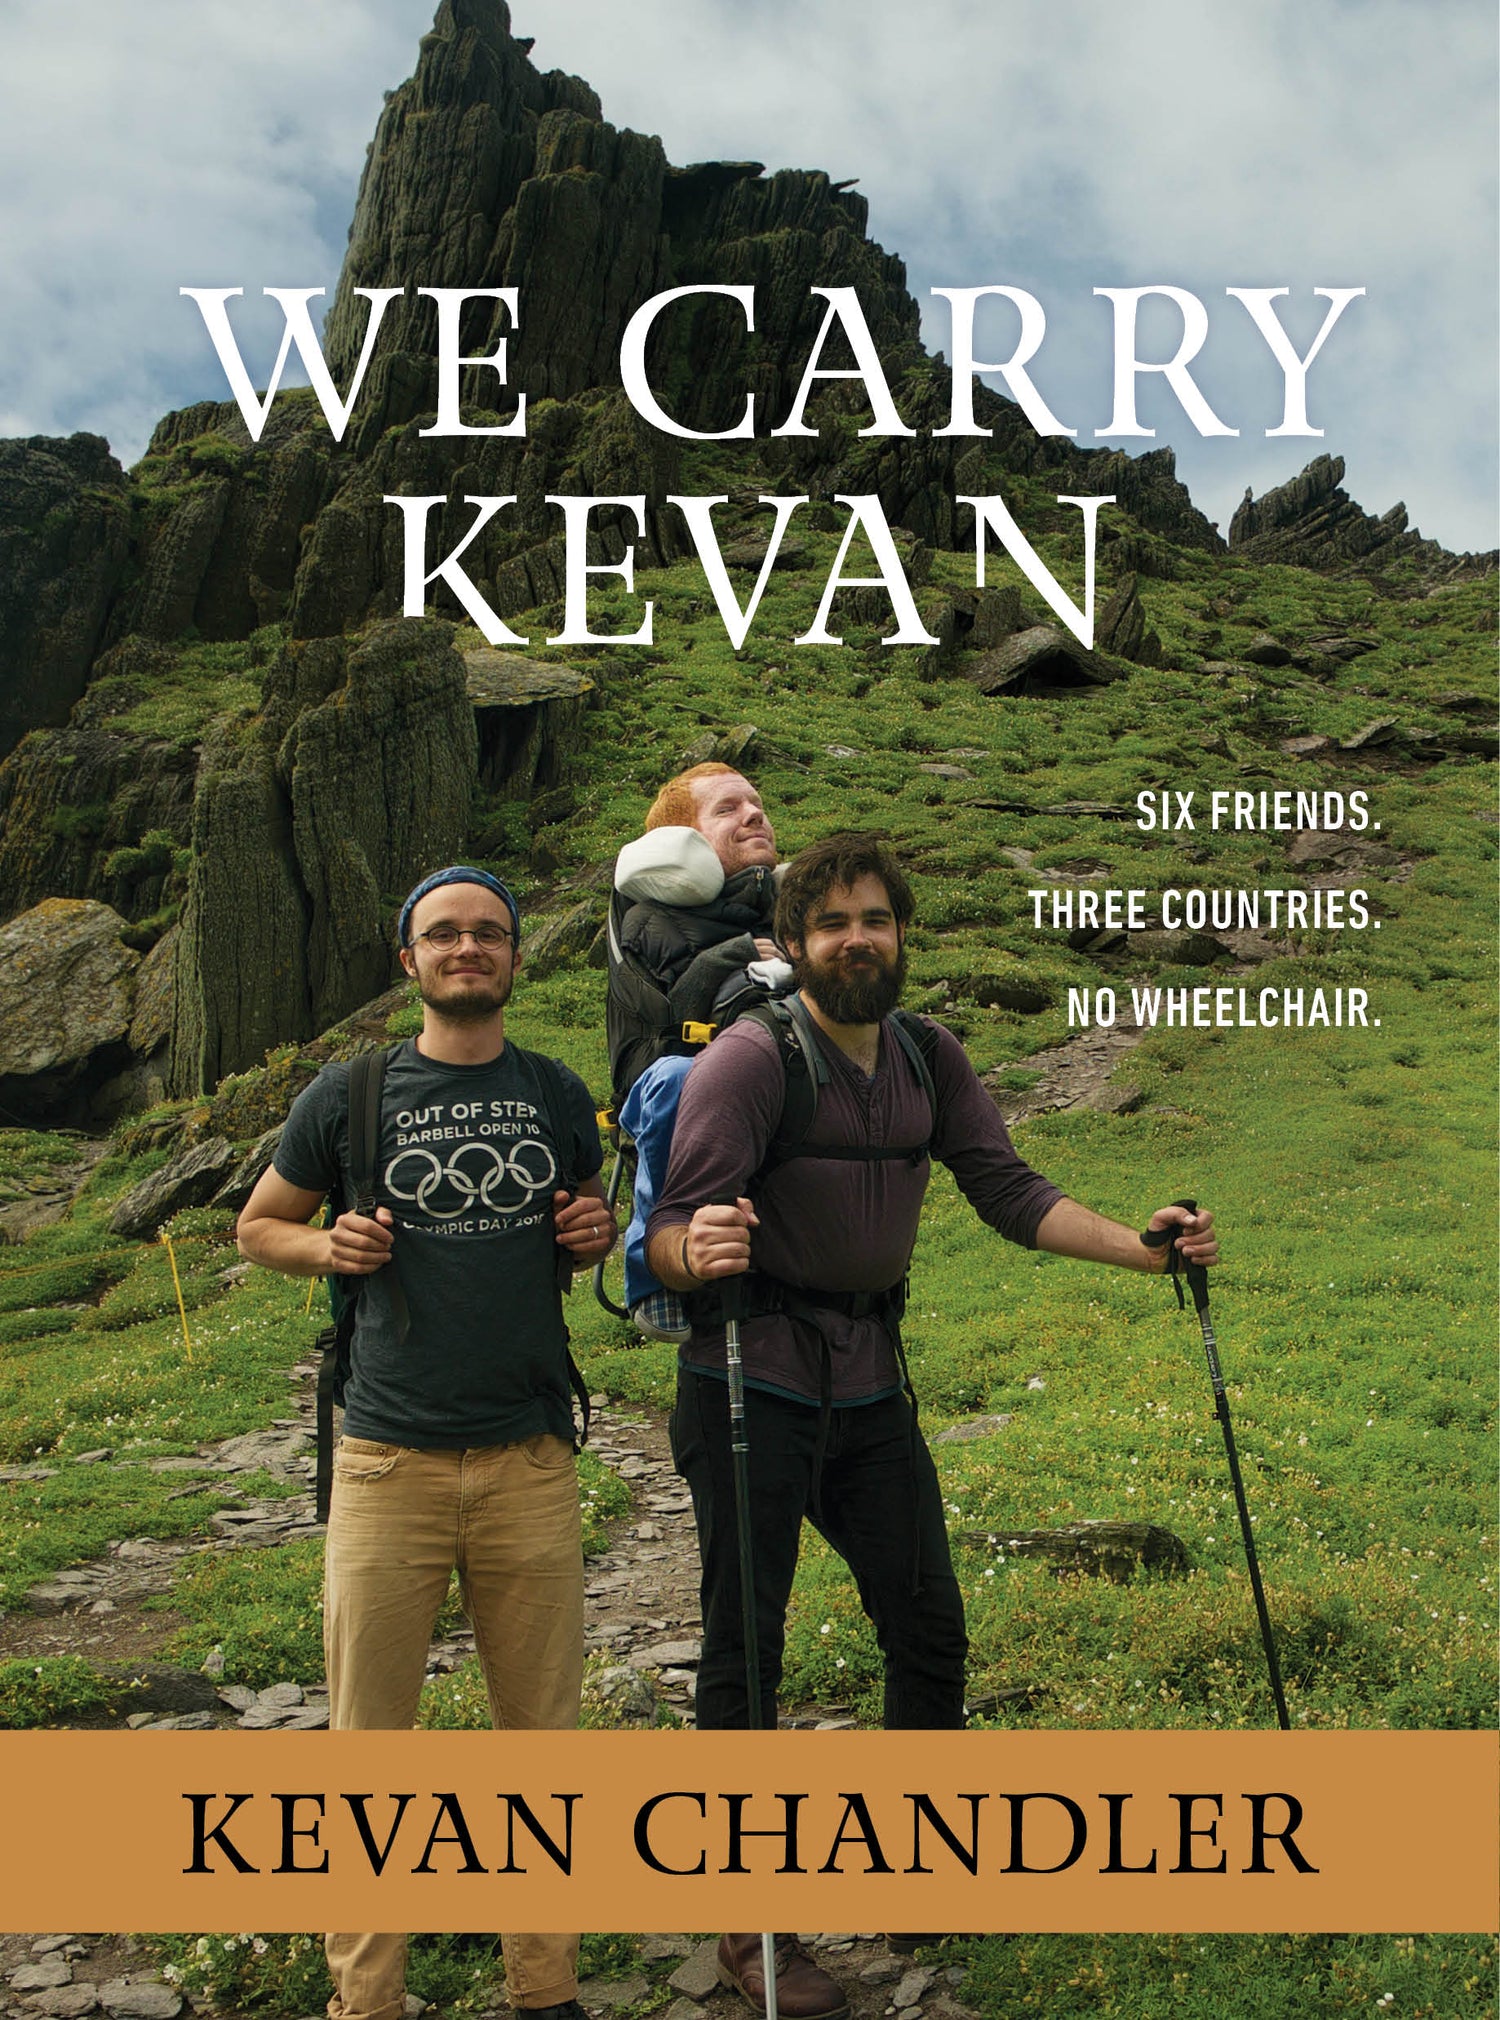 We Carry Kevan - The Book